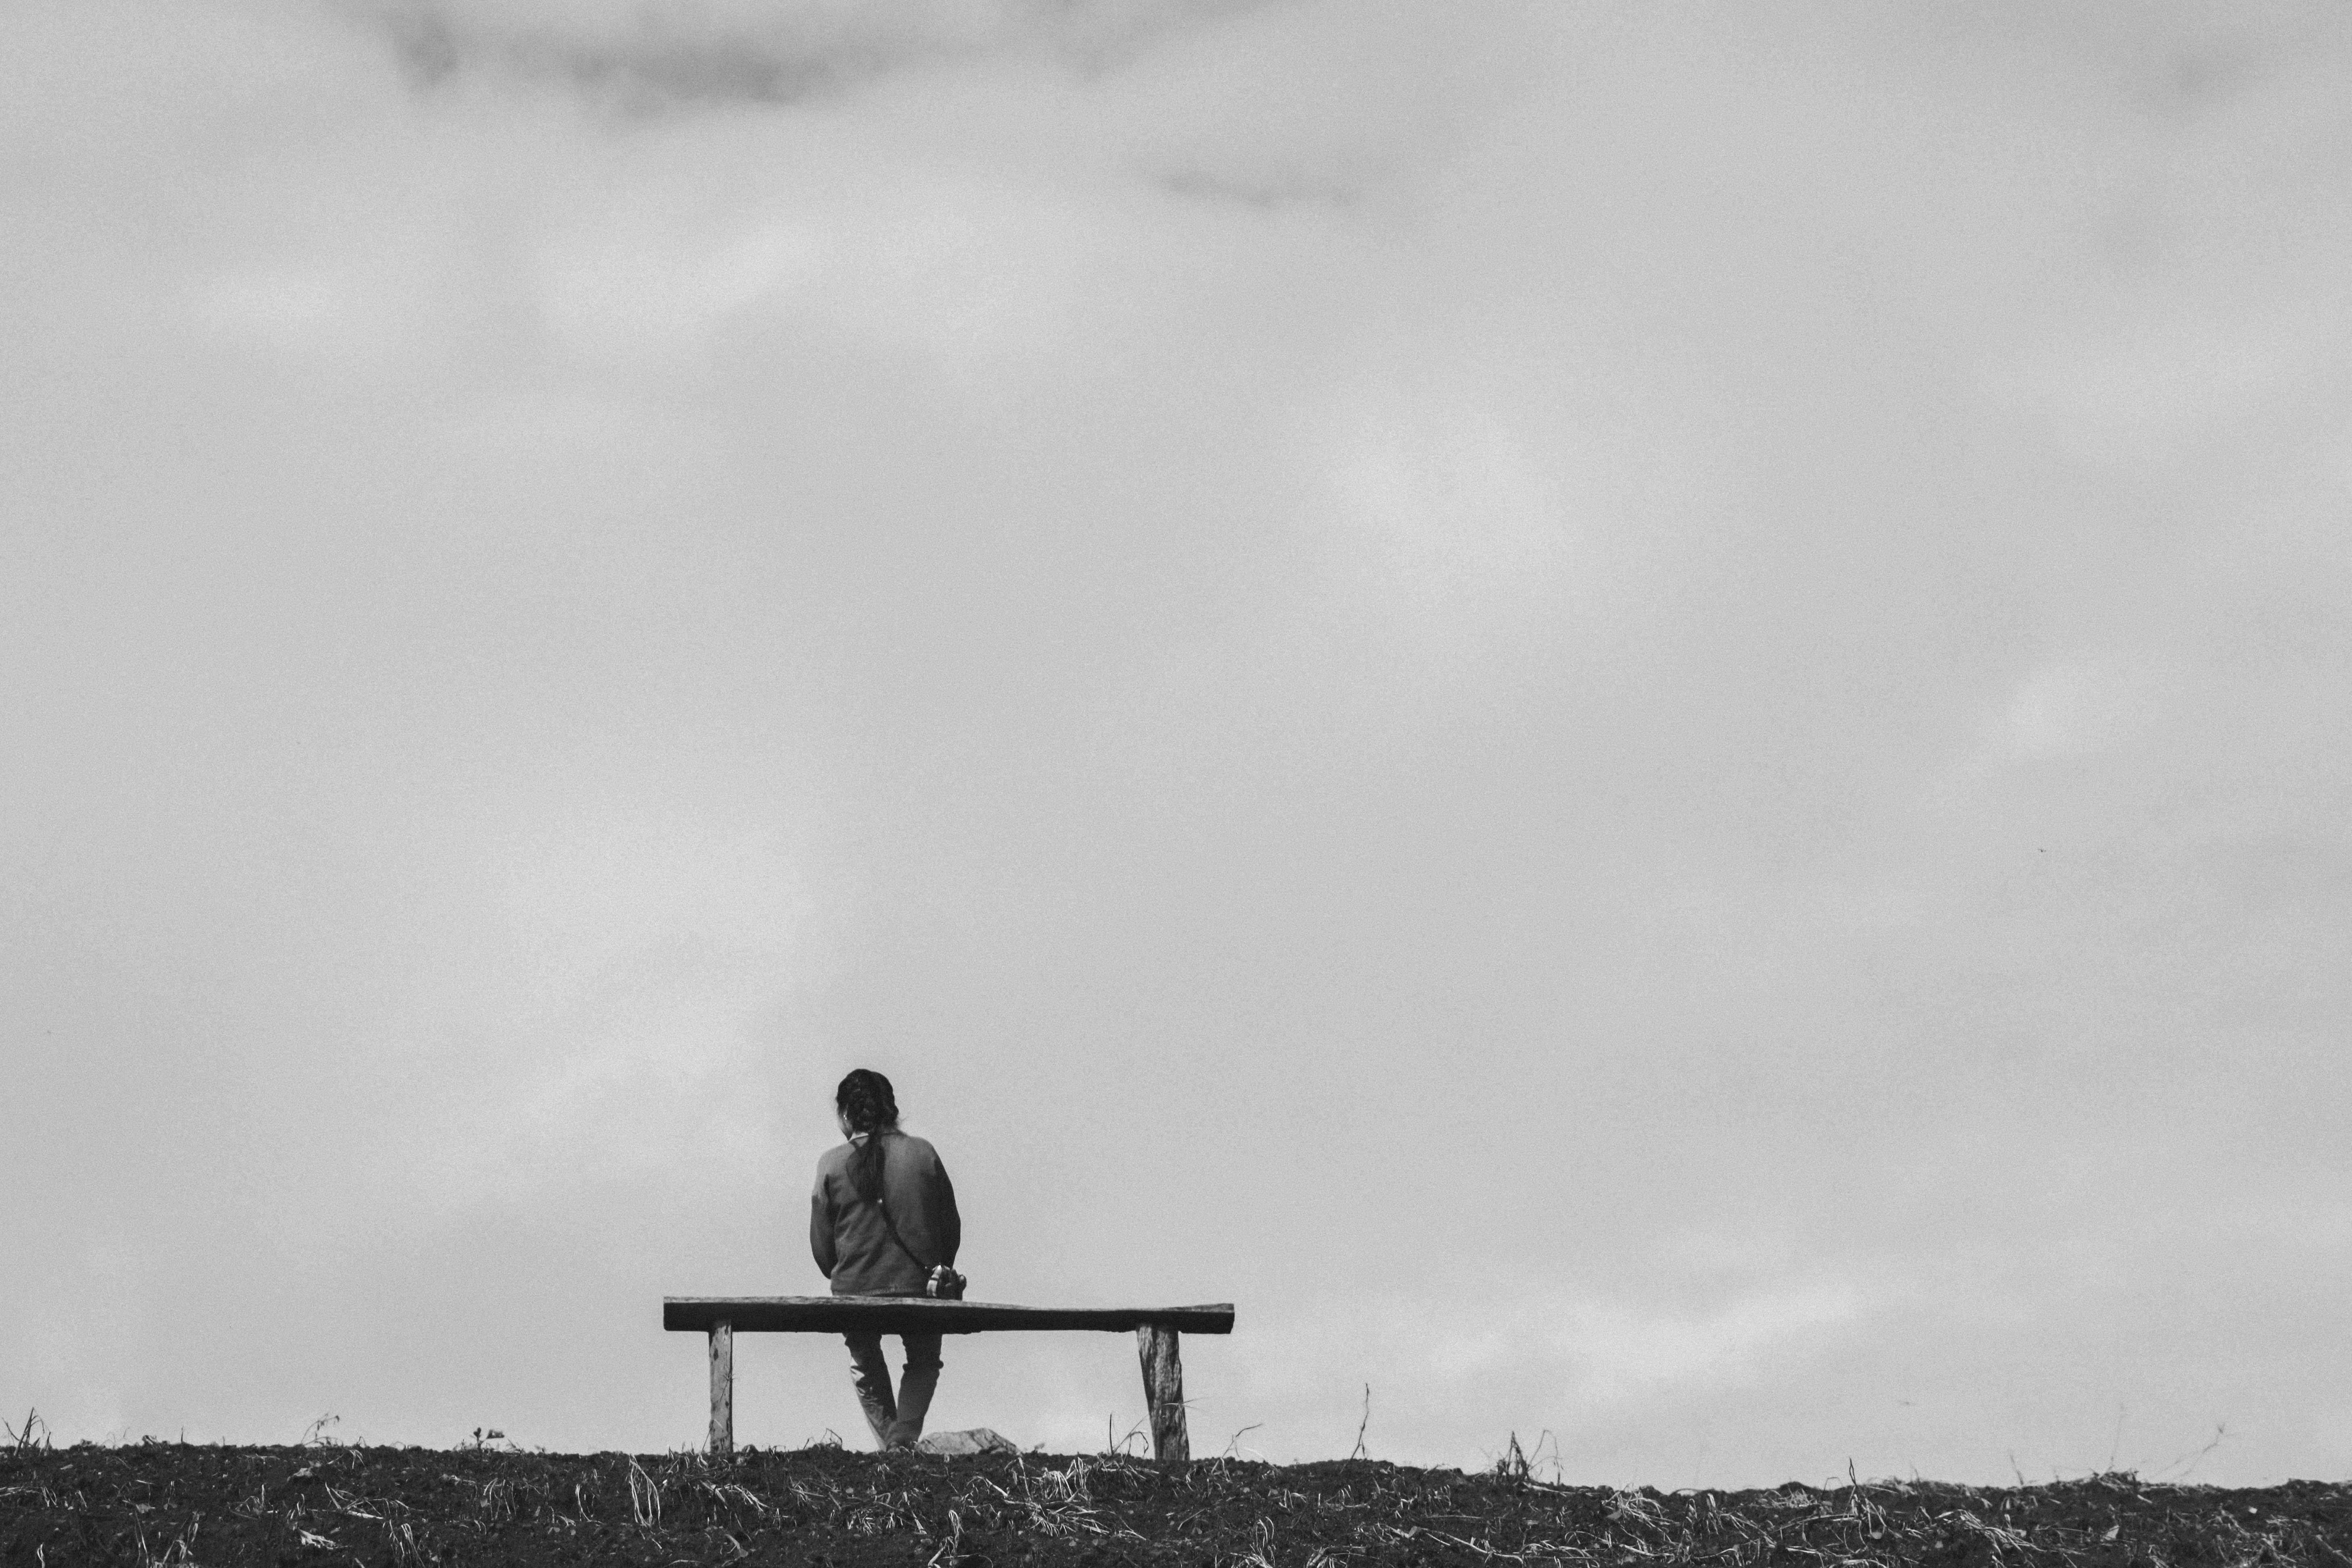 miscellanea, miscellaneous, bw, chb, human, person, loneliness, bench for Windows